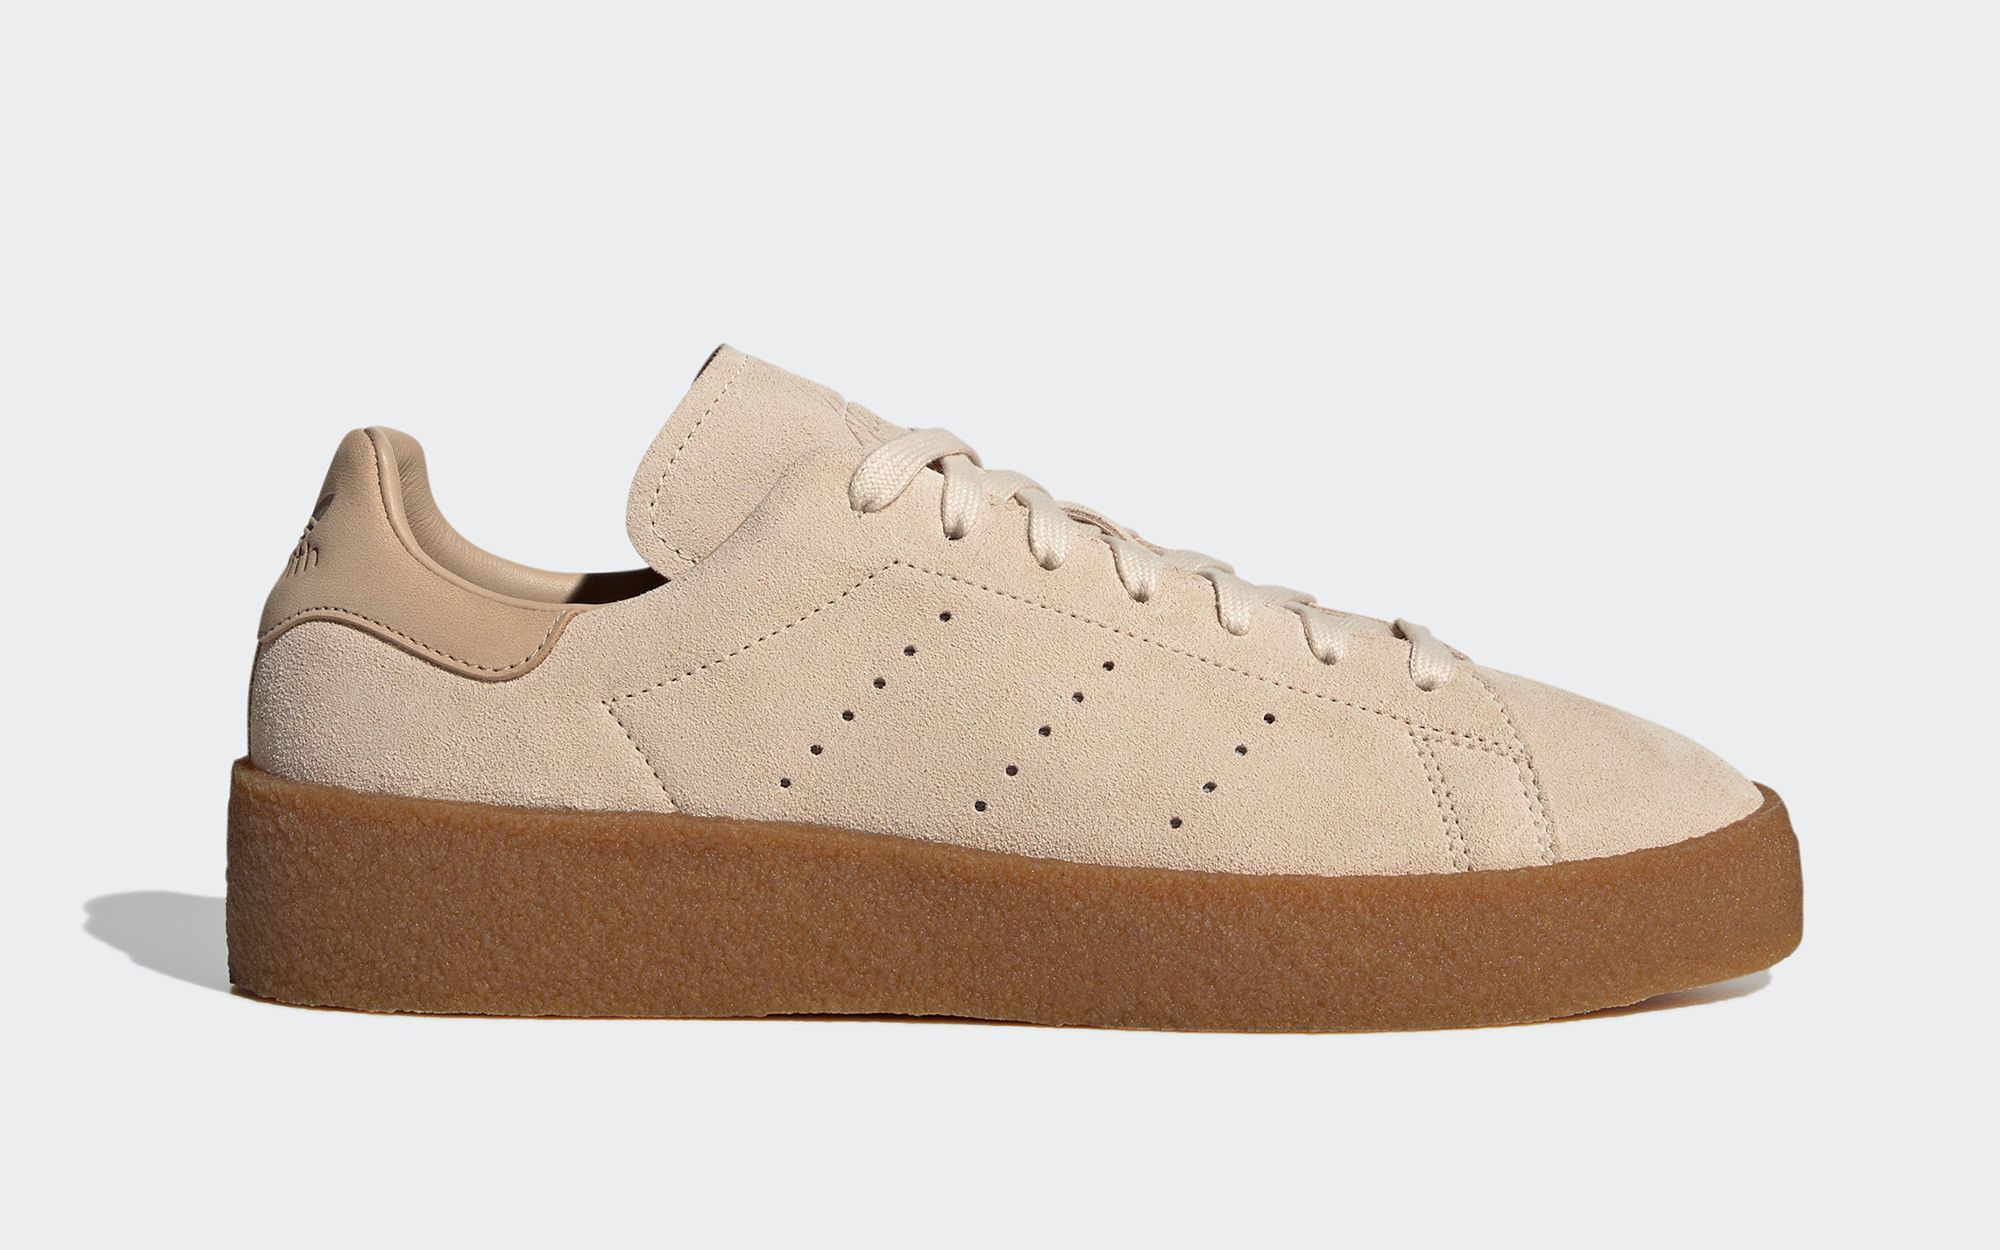 The adidas Stan Smith Crepe is the Sneaker of the Season | House